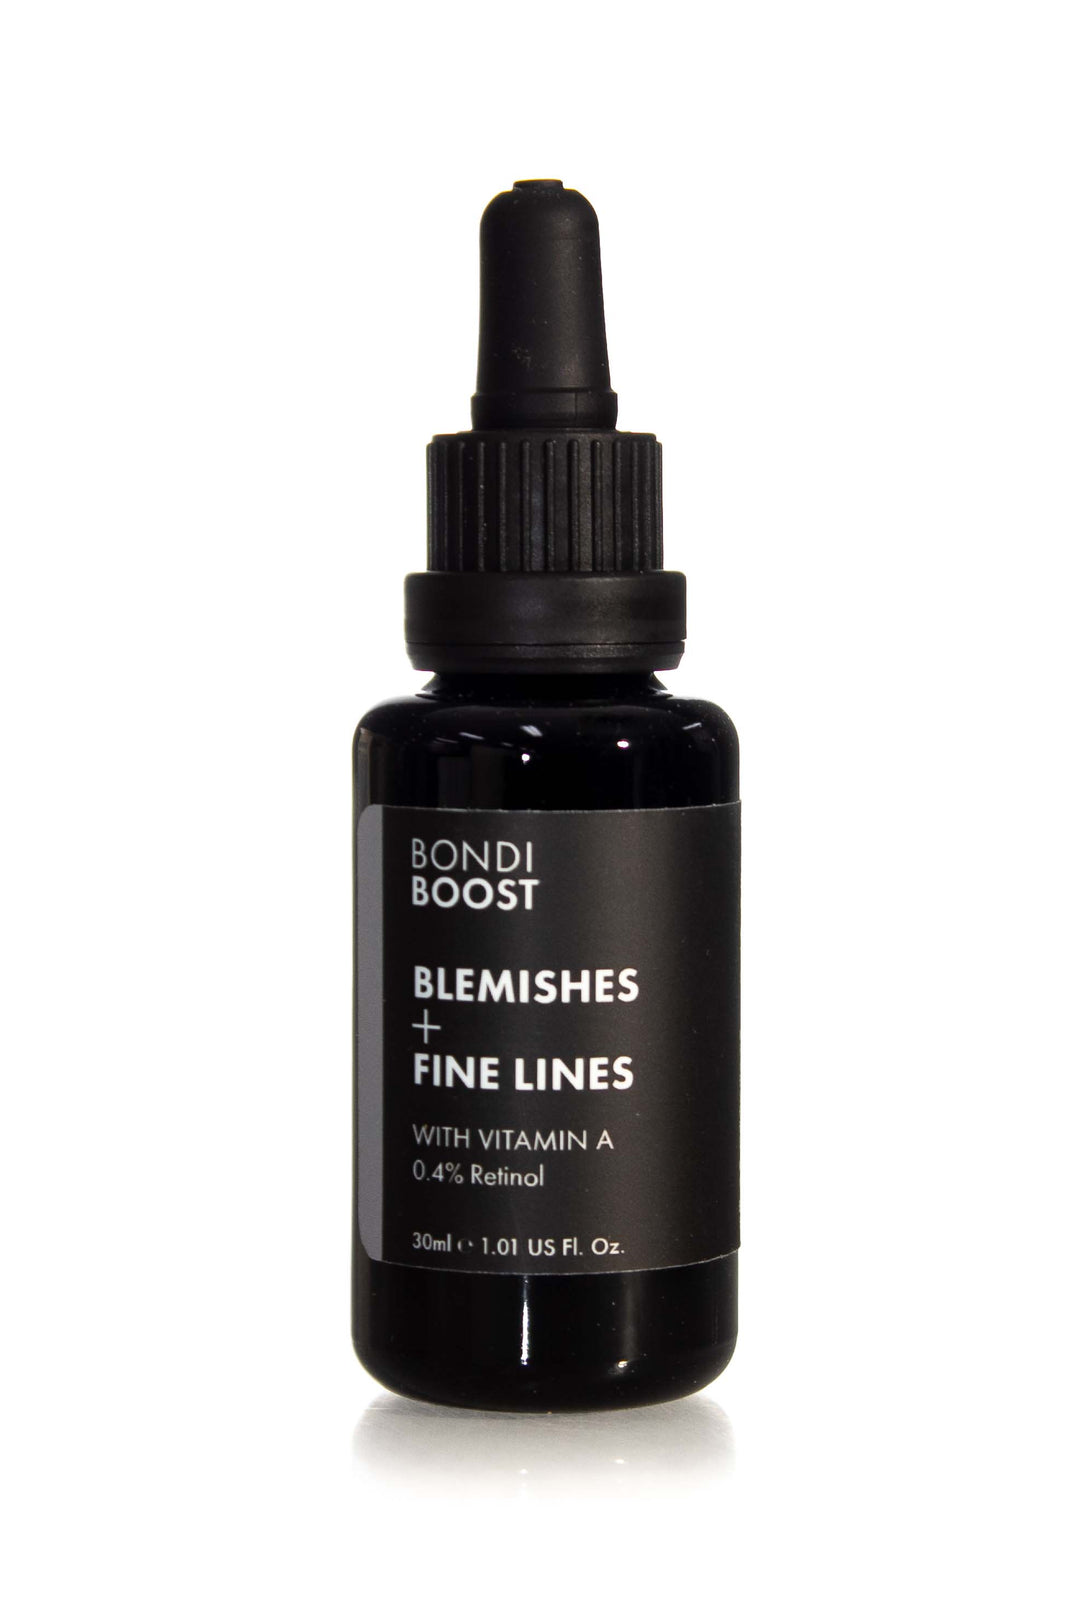 Bondi Boost Super Serum for Blemishes and Fine Lines